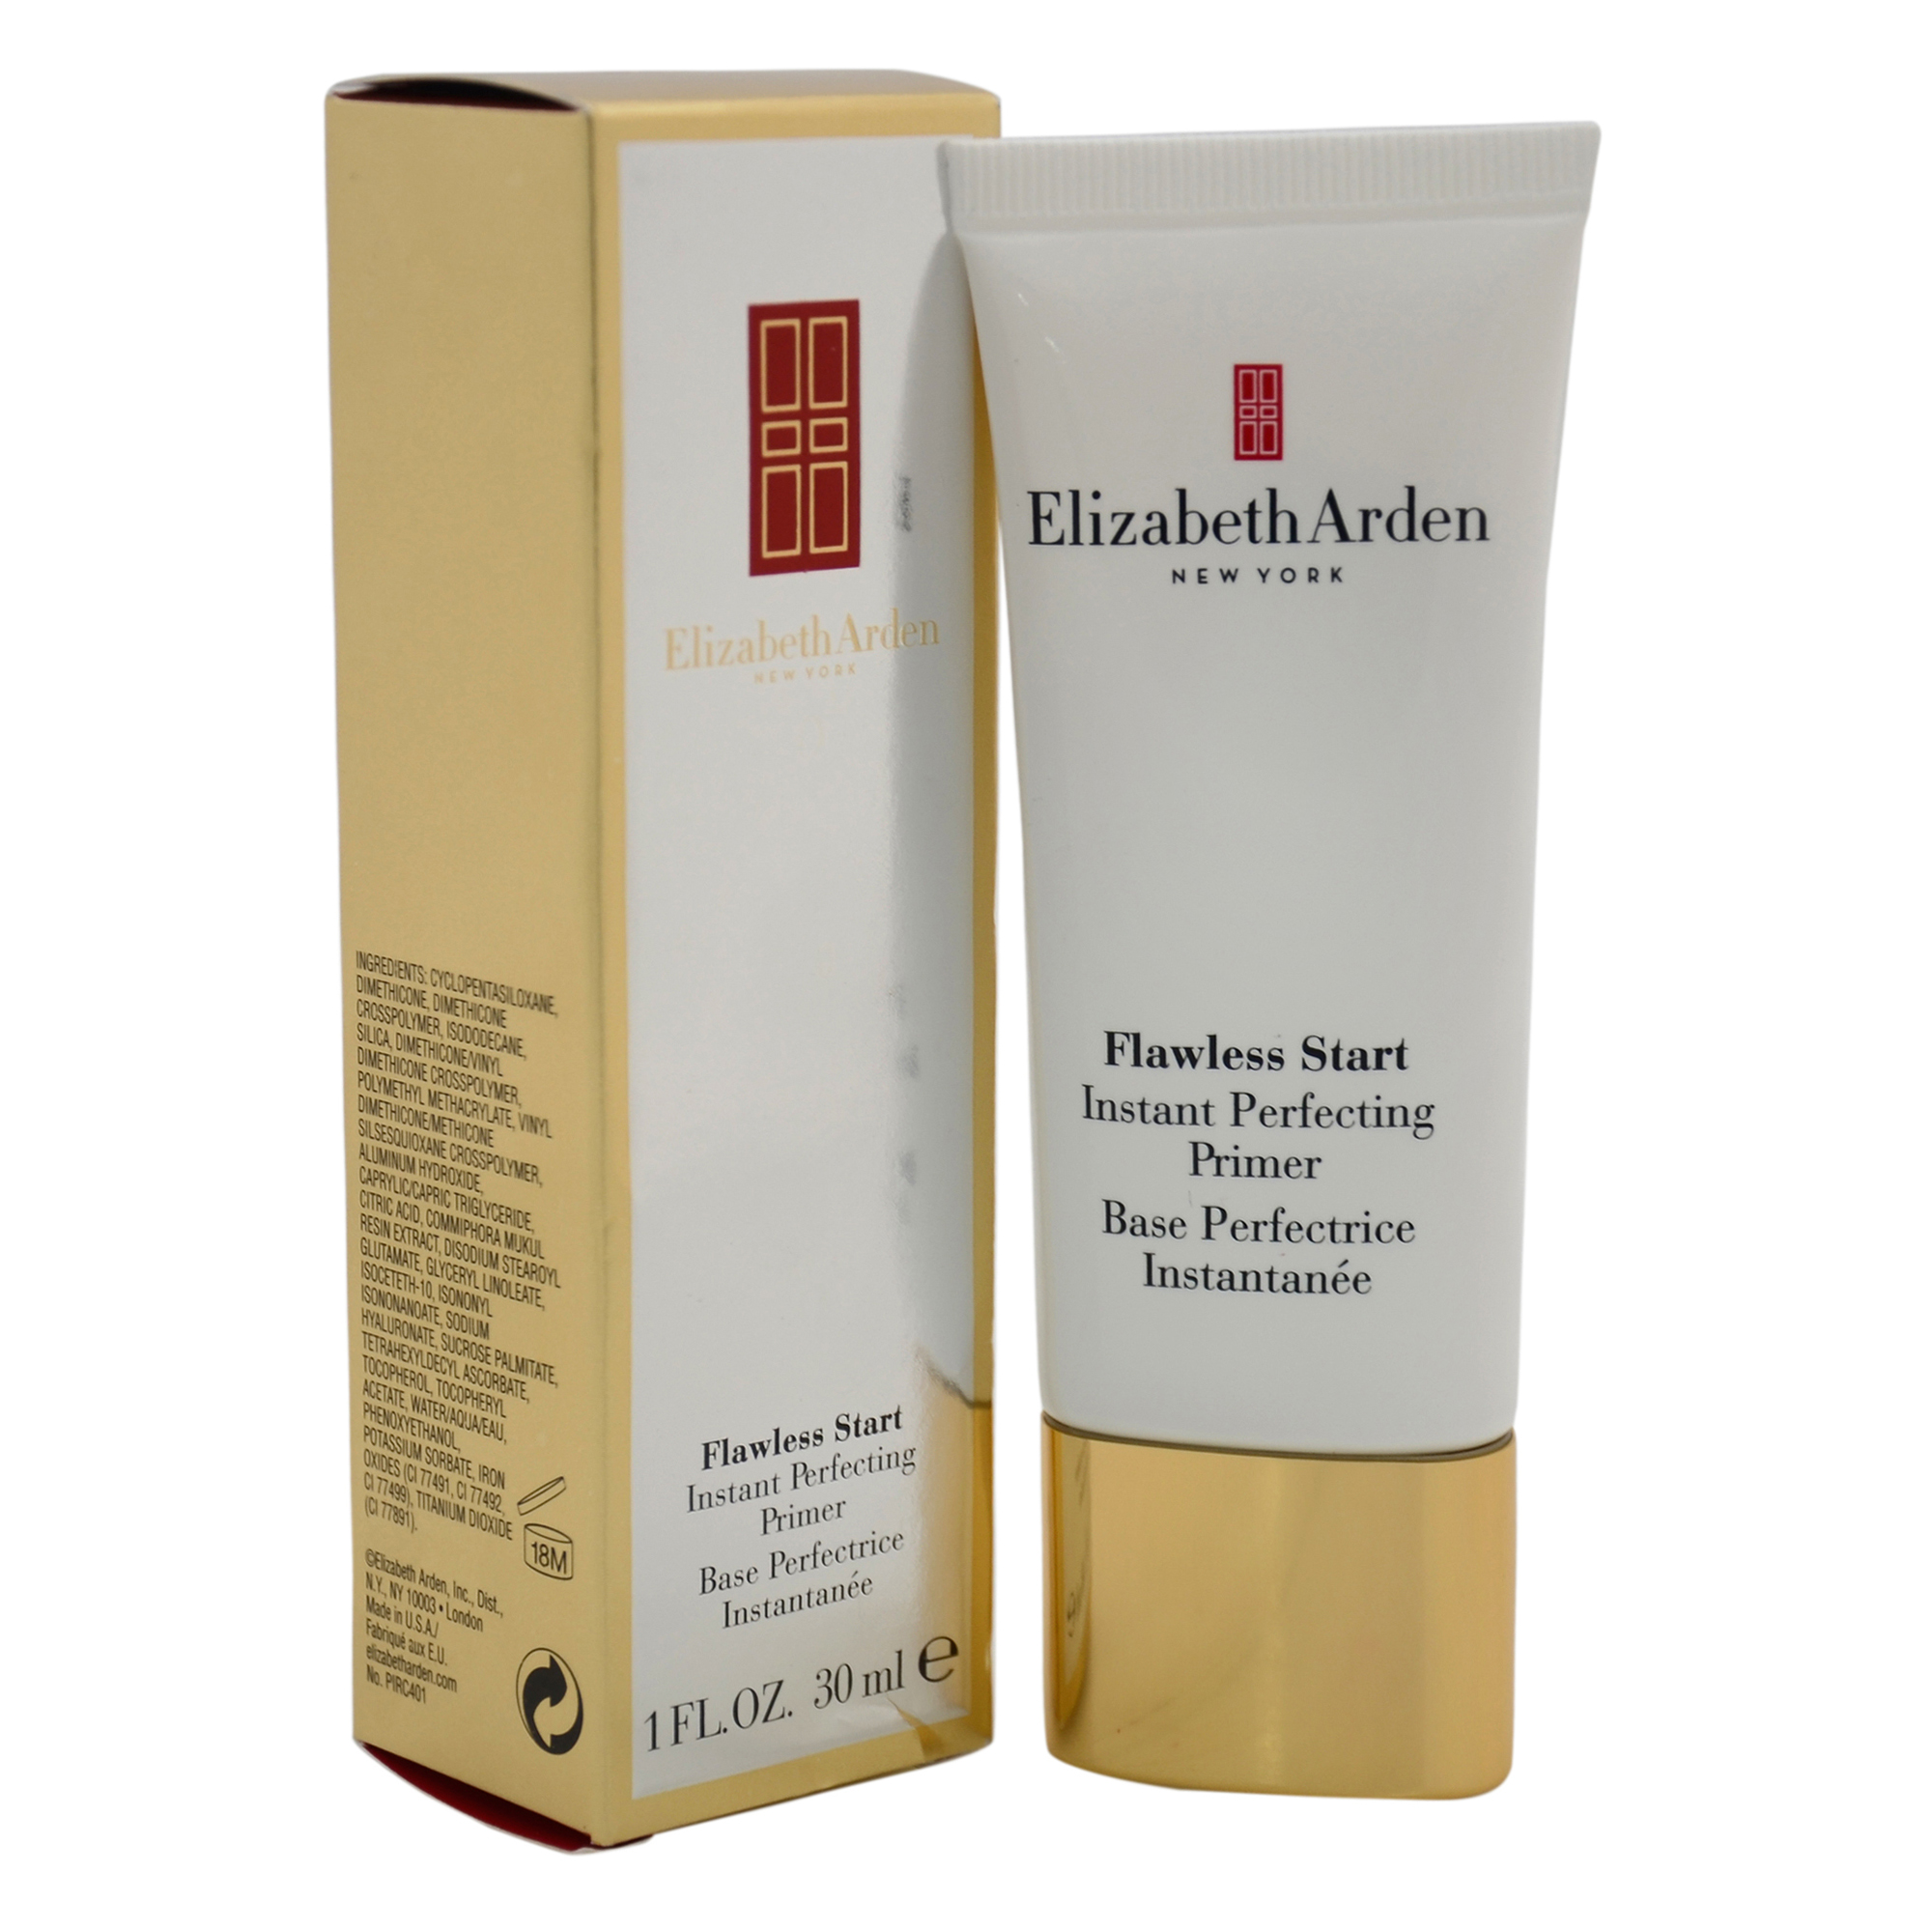 Flawless Start Instant Perfecting Primer by Elizabeth Arden for Women - 1 oz Primer - image 1 of 2